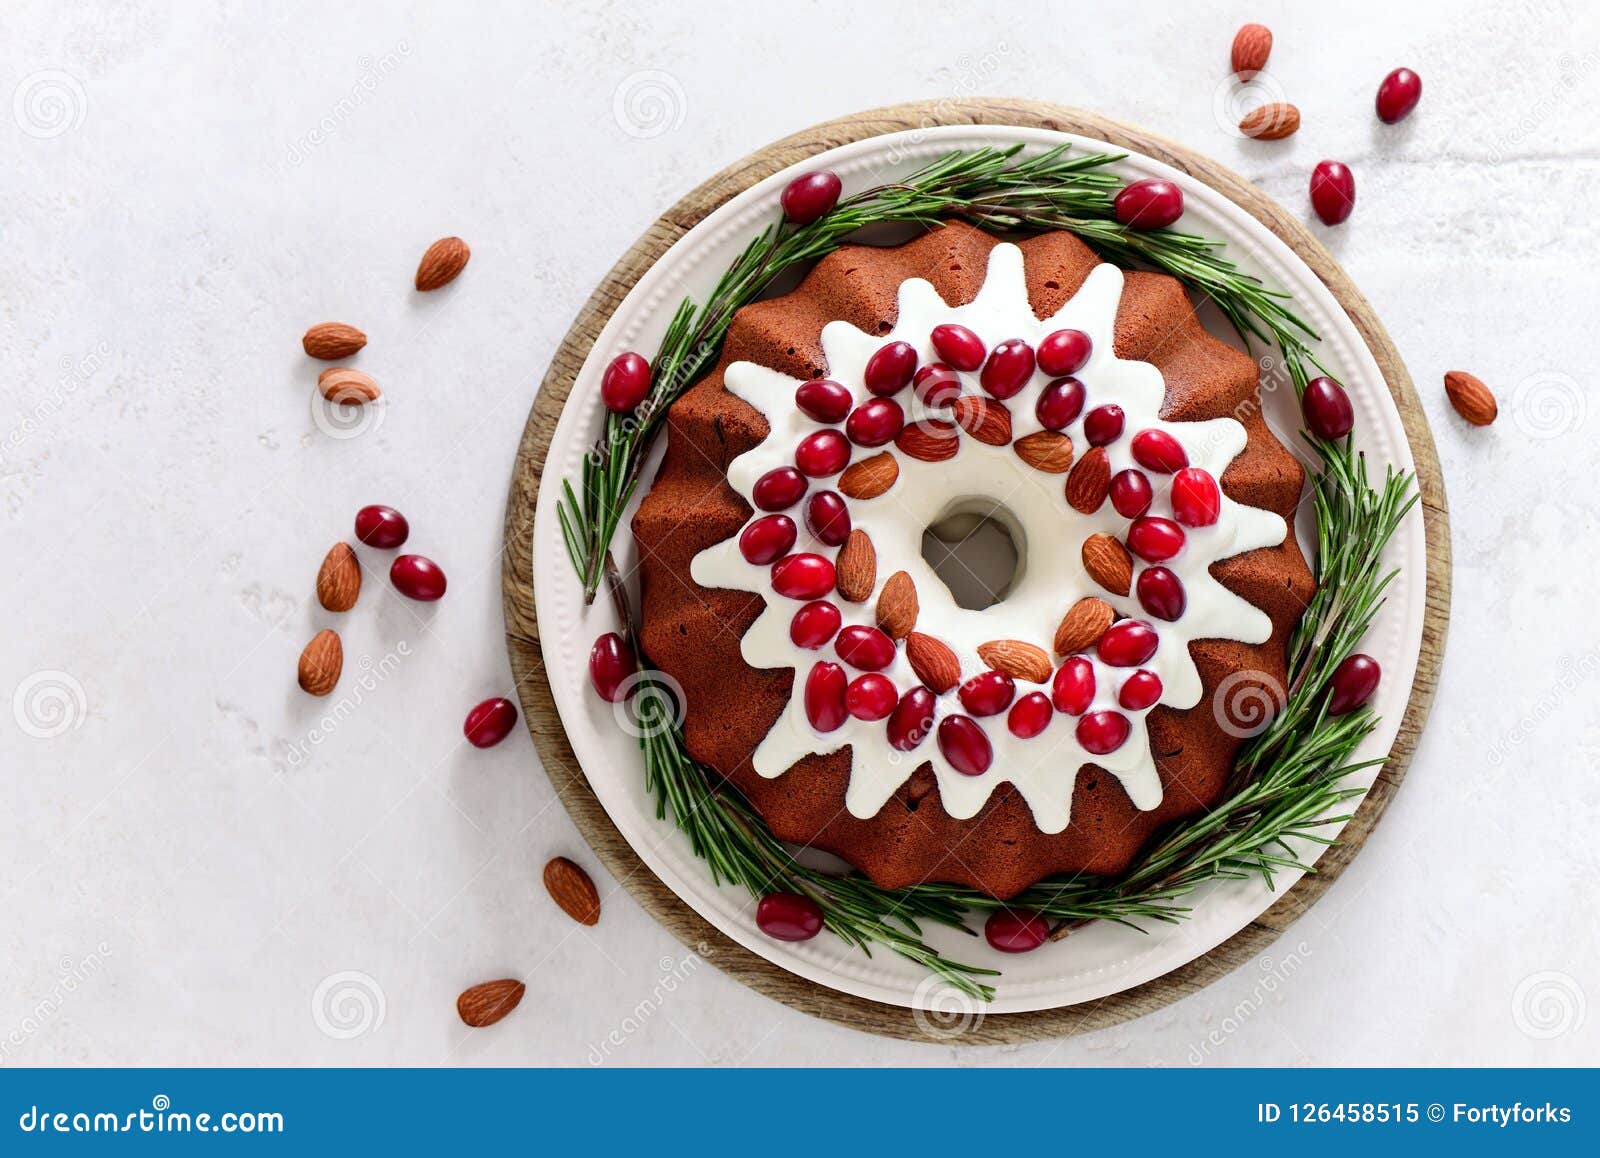 Christmas Pound Cake With Cranberries Stock Image Image Of Marble Food 126458515